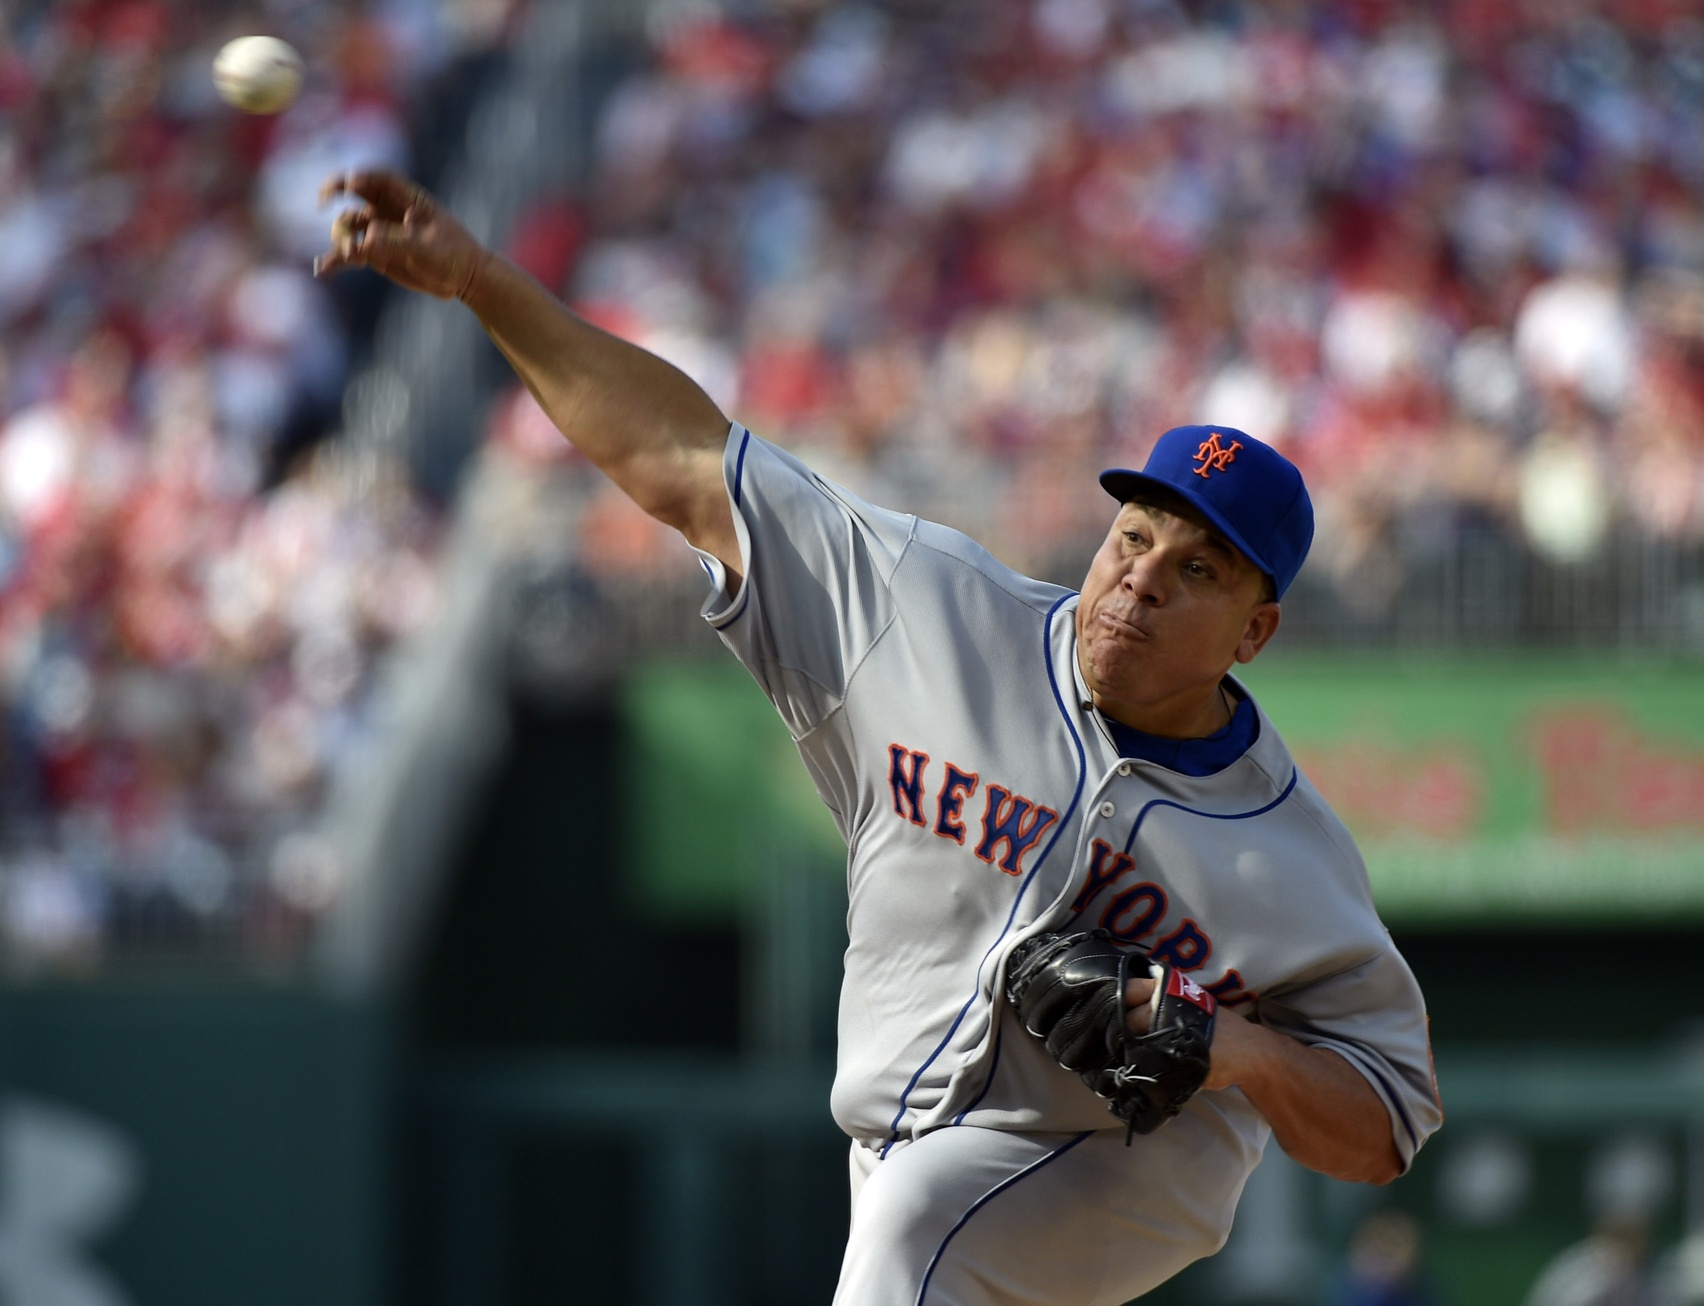 Bartolo Colón to Throw First Pitch — Sunday, May 7